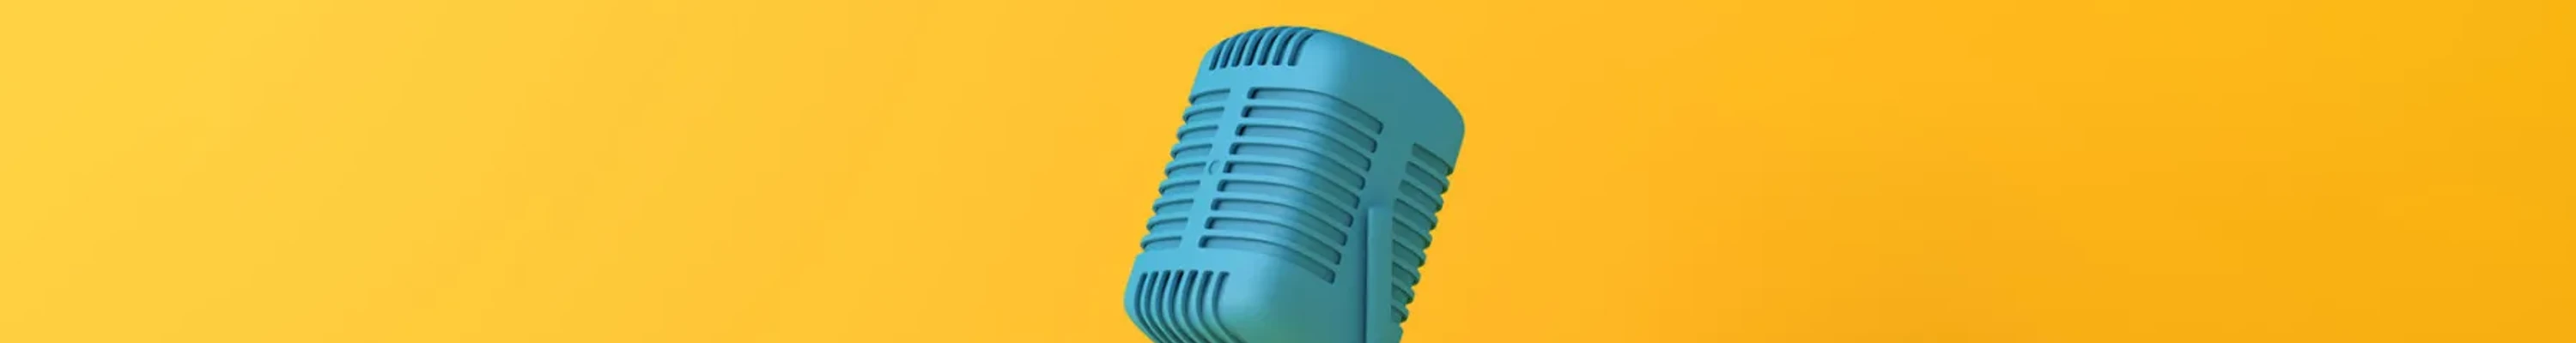 Blue retro microphone on yellow background resized